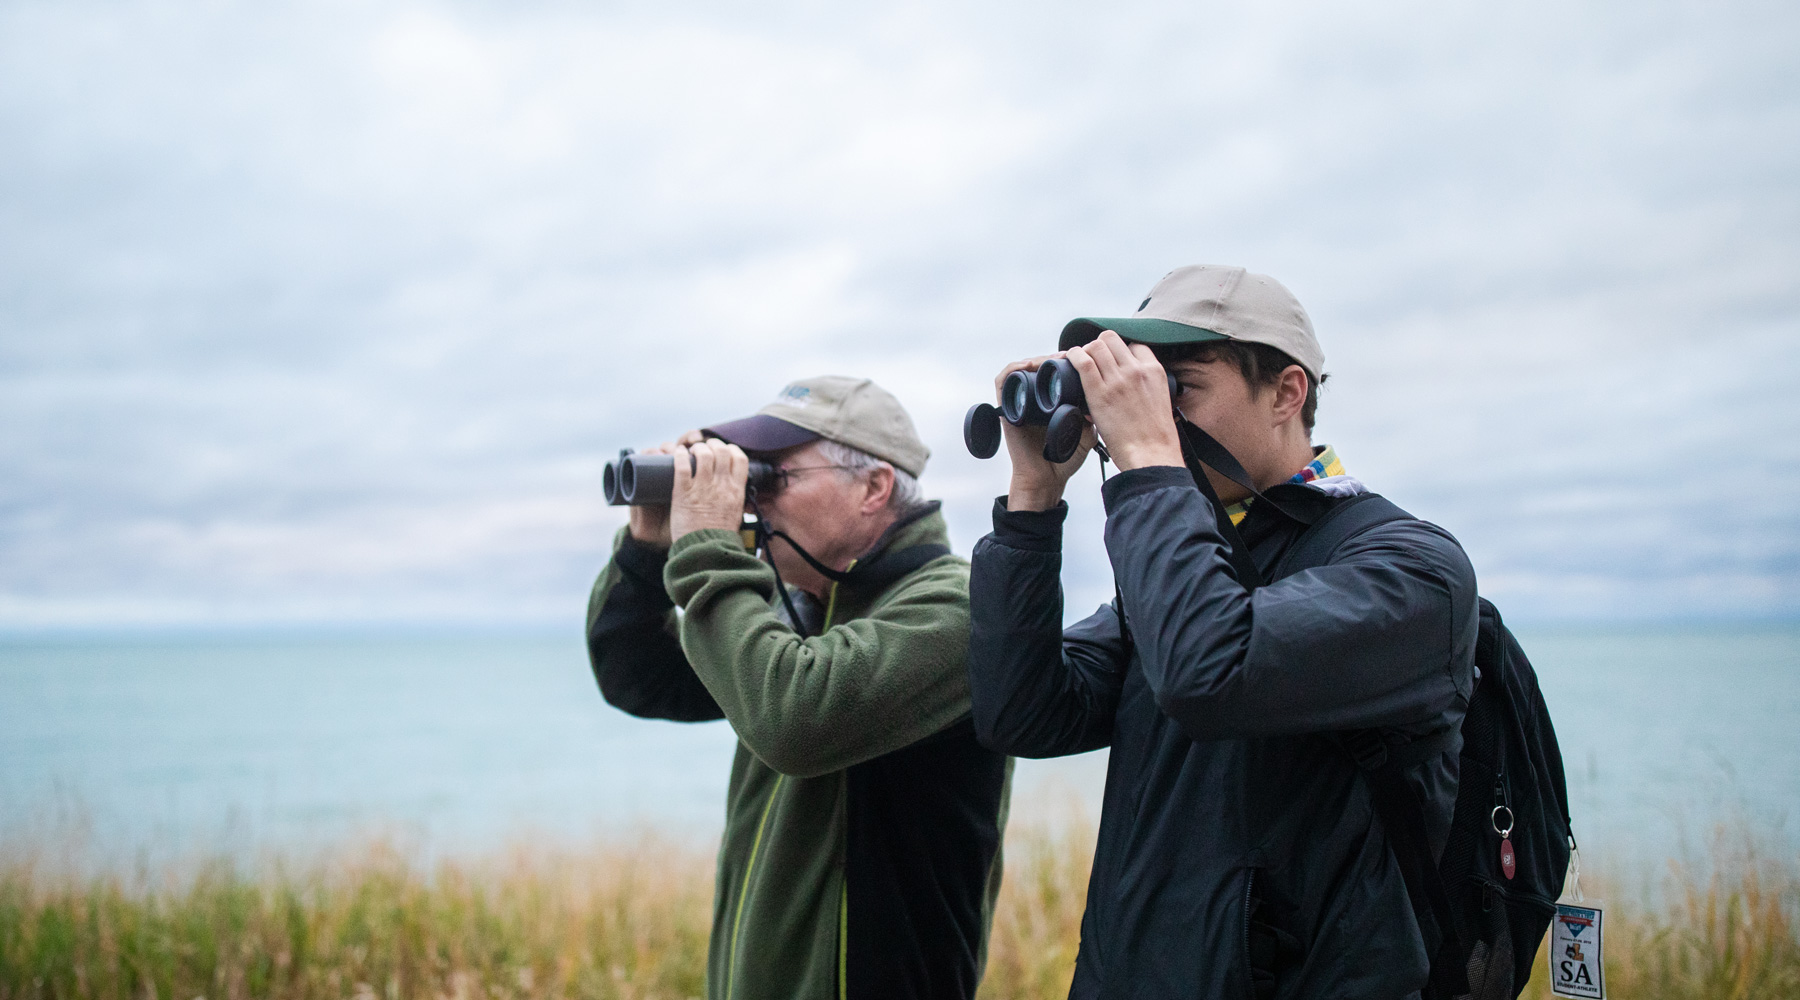 President's Medallion winner Kevin White spends early mornings bird-watching around Lake Shore Campus with his professor, Father Mitten, who records bird deaths from hitting glass buildings around campus. (Photo: Lukas Keapproth)